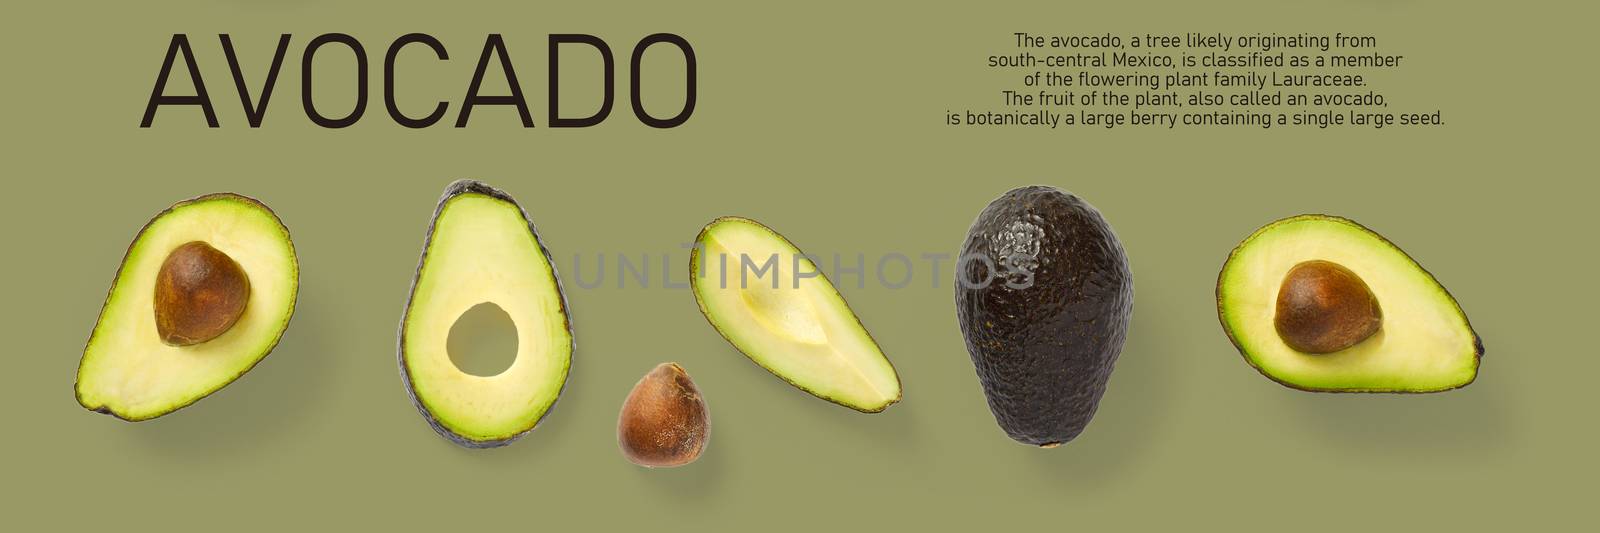 Modern creative avocado collage with simple text on solid color background. Avocado slices creative layout on olive background. Flat lay, Design elements, Food concept